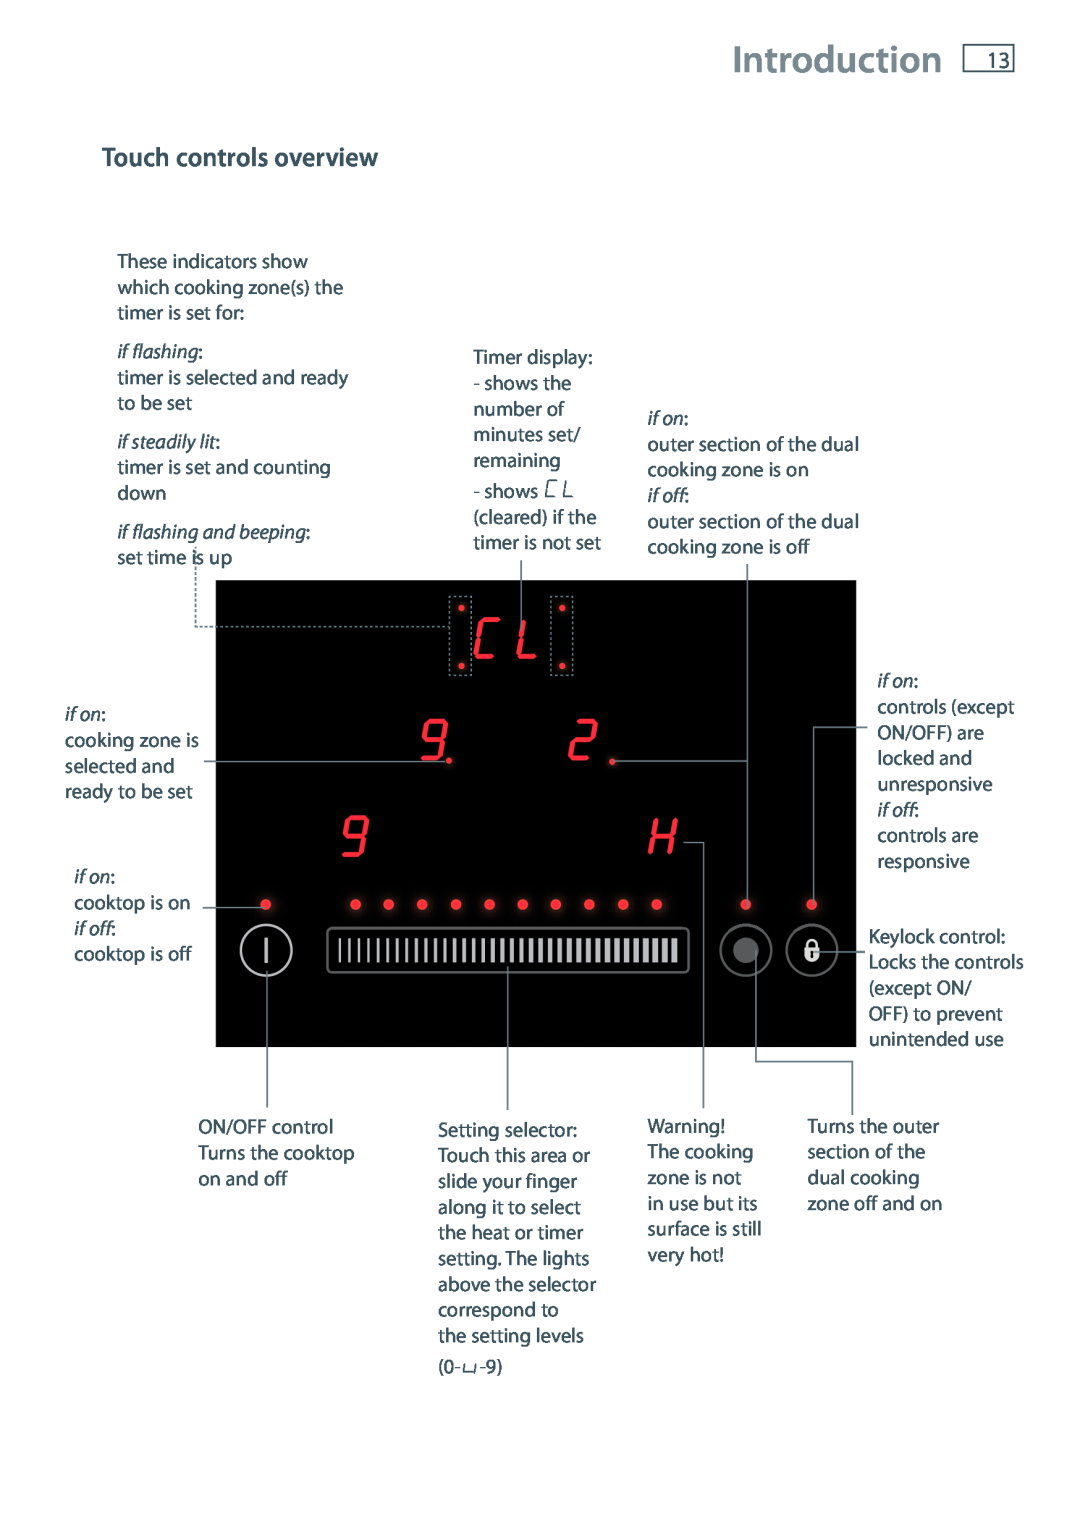 Fisher & Paykel CE604DT, CE704DT, CE754DT installation instructions Touch controls overview, Introduction 